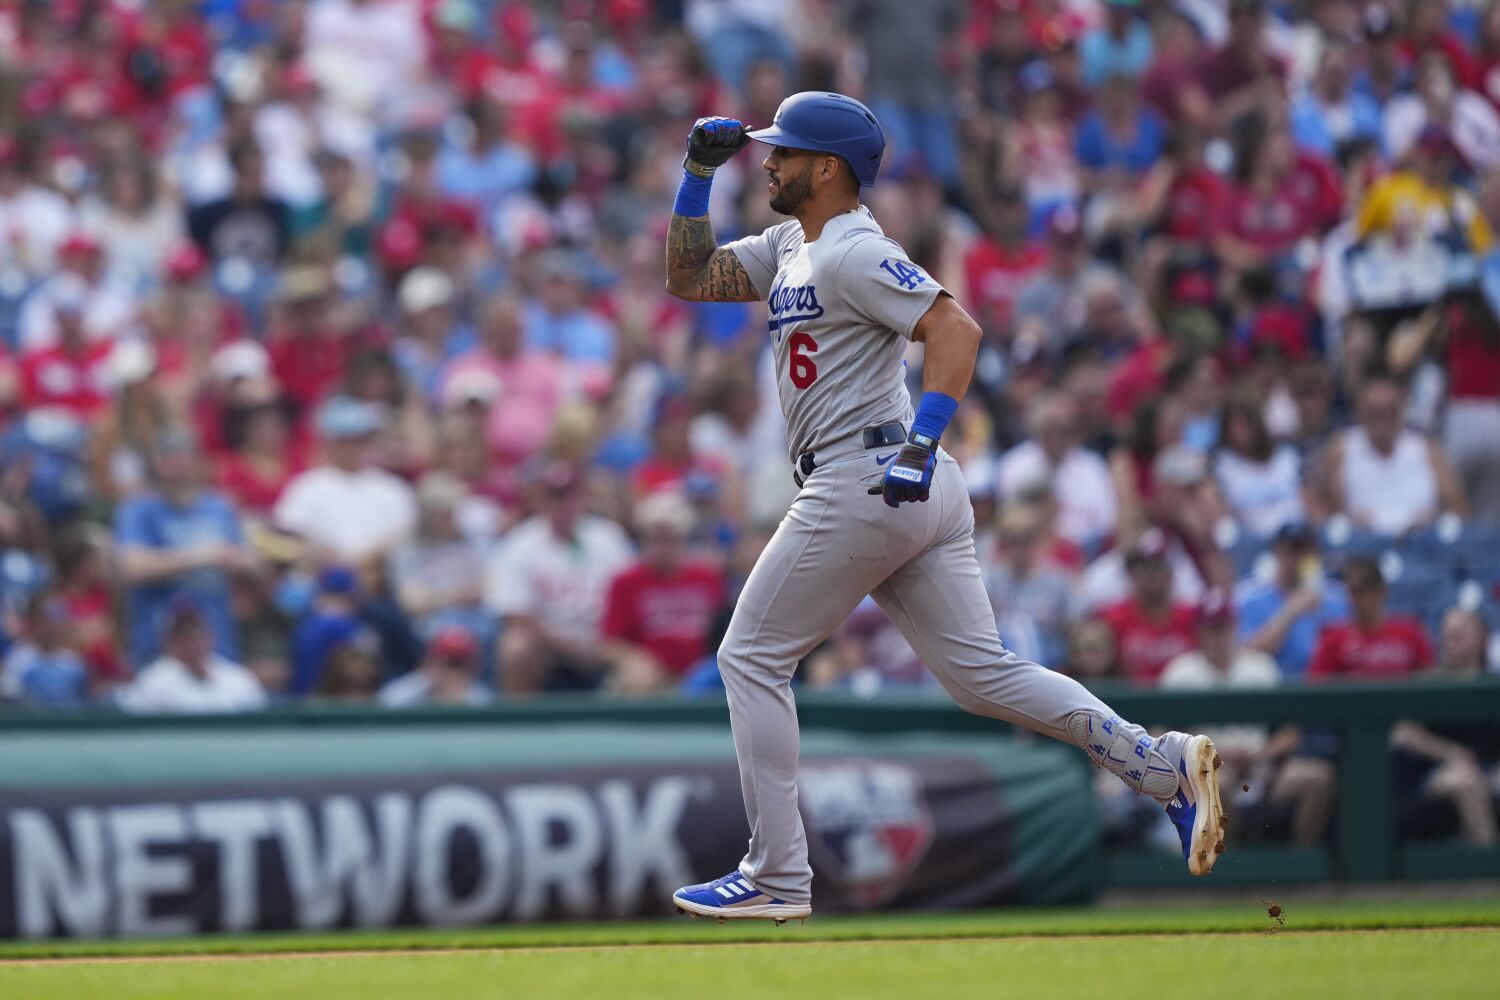 Dodgers, Bobby Miller have near perfect outing in win over Phillies